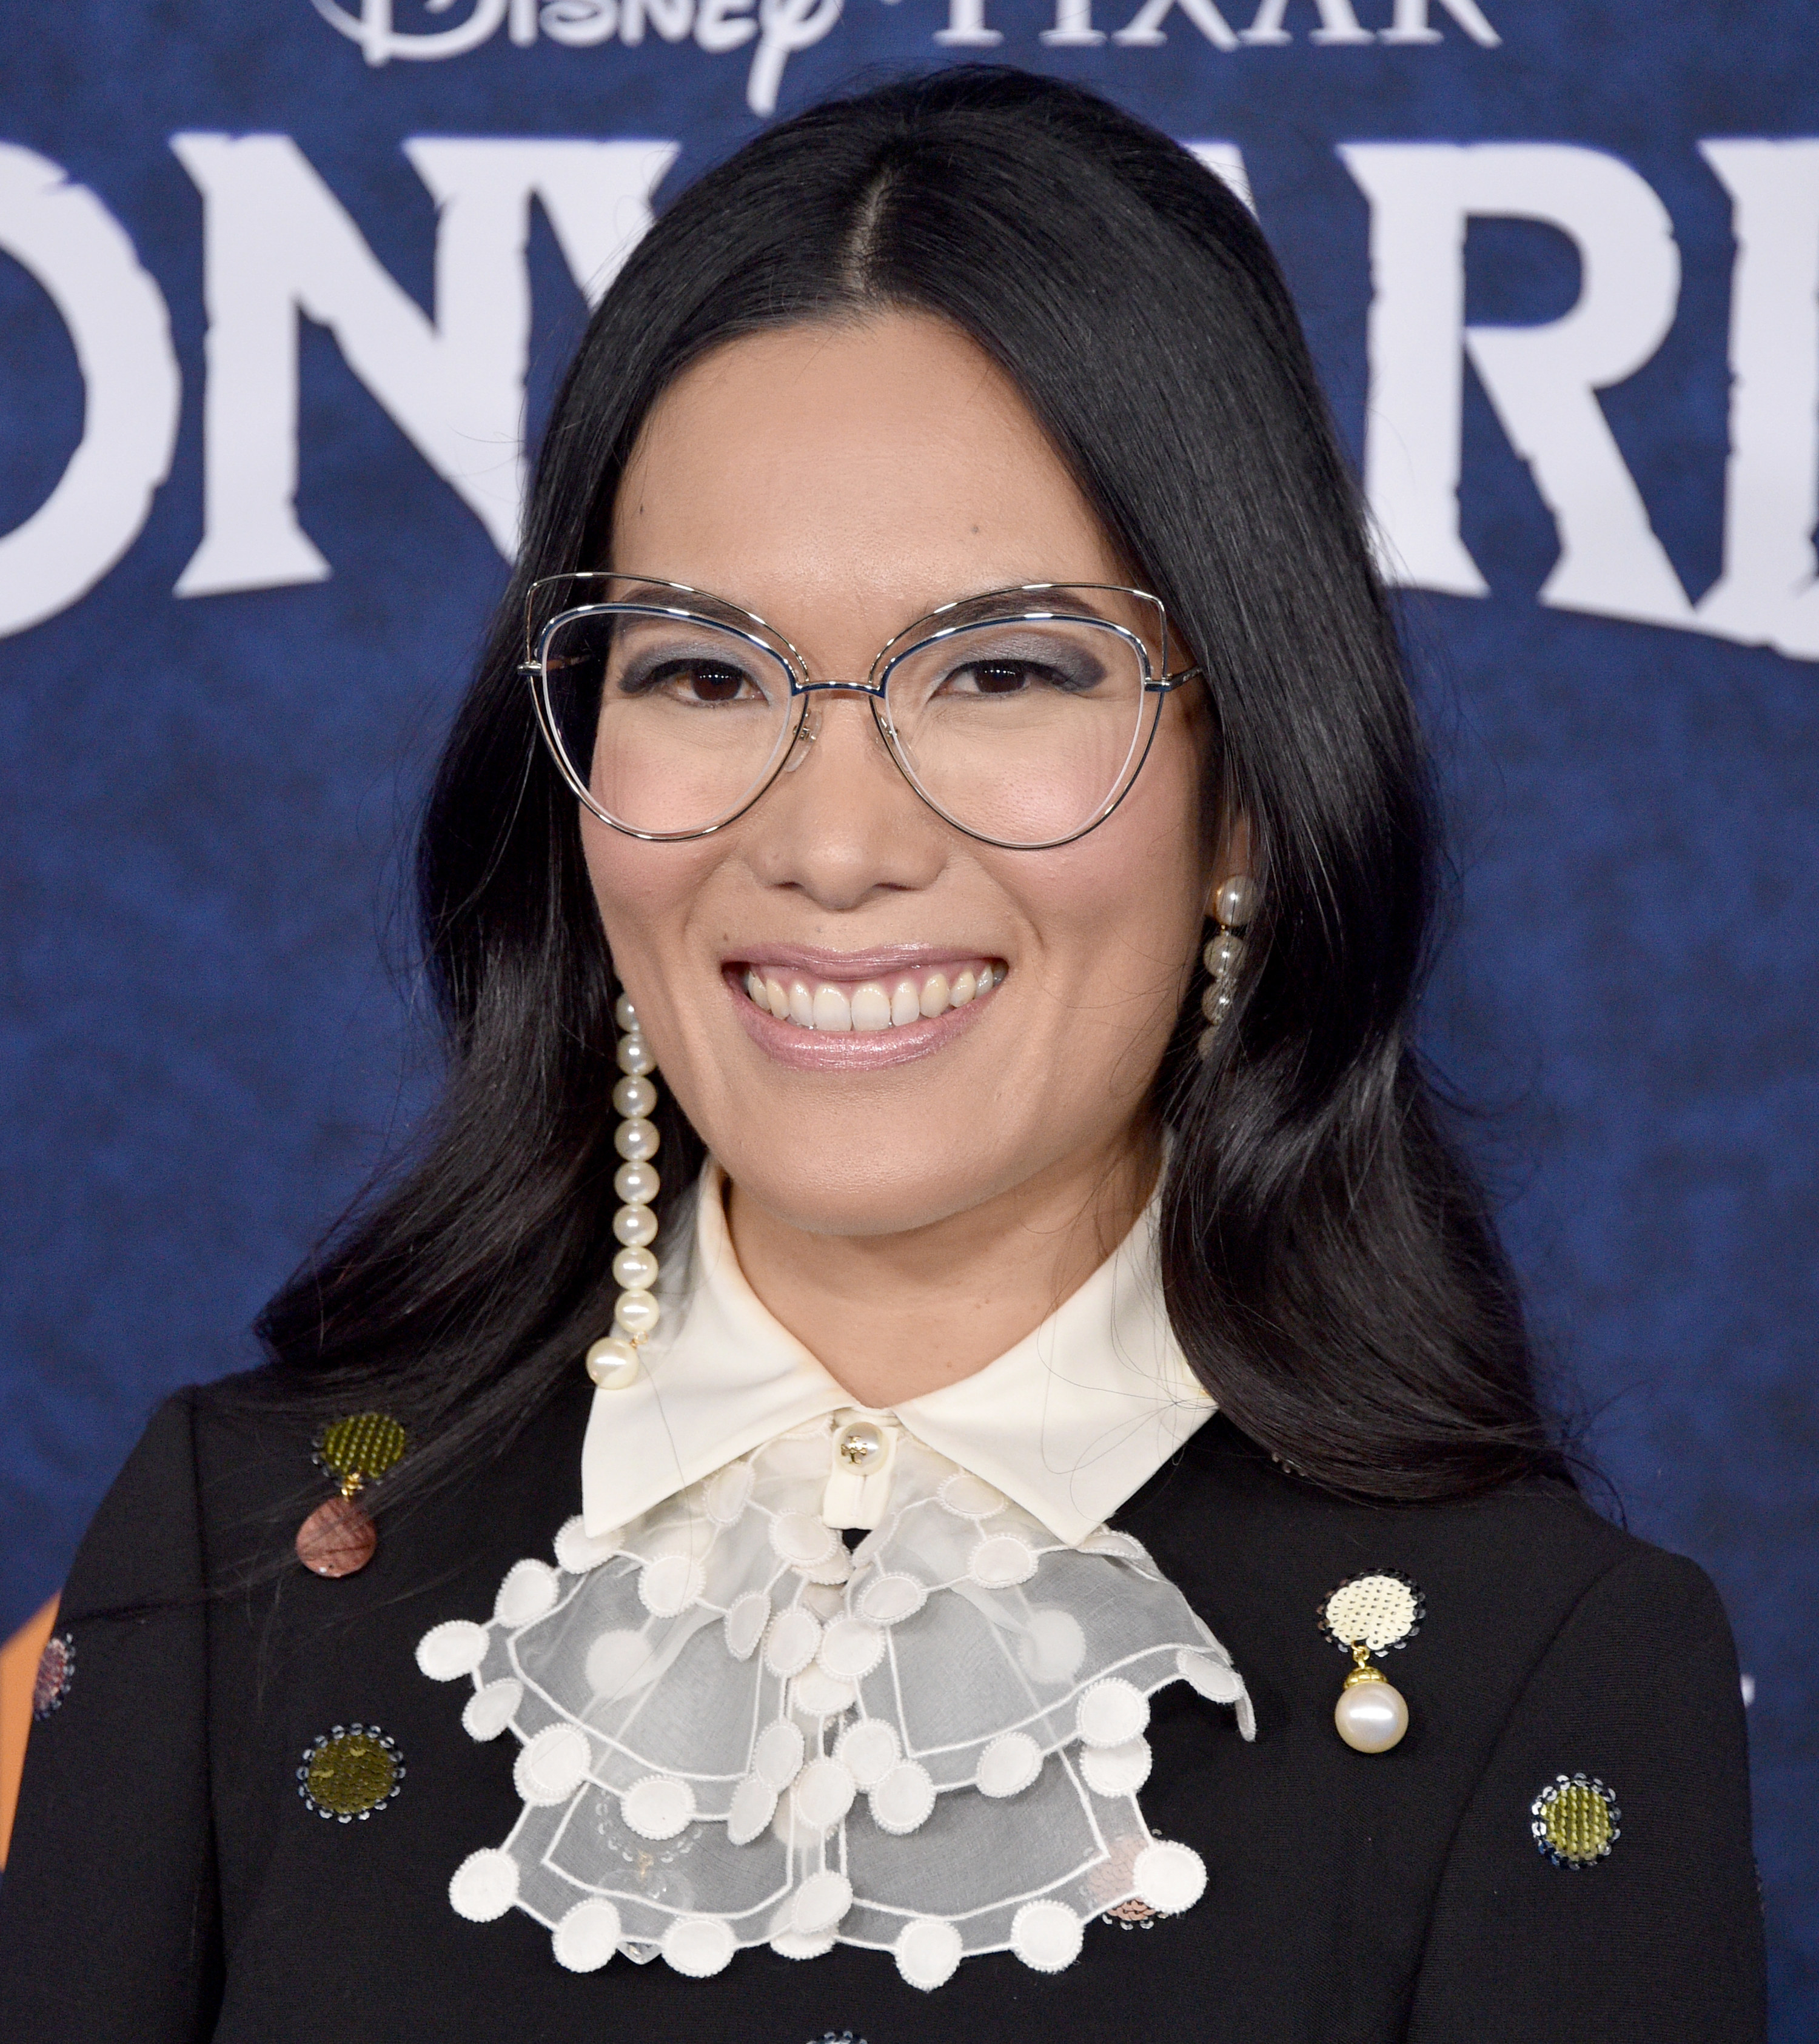 A closeup of Ali Wong smiling at a red carpet event.